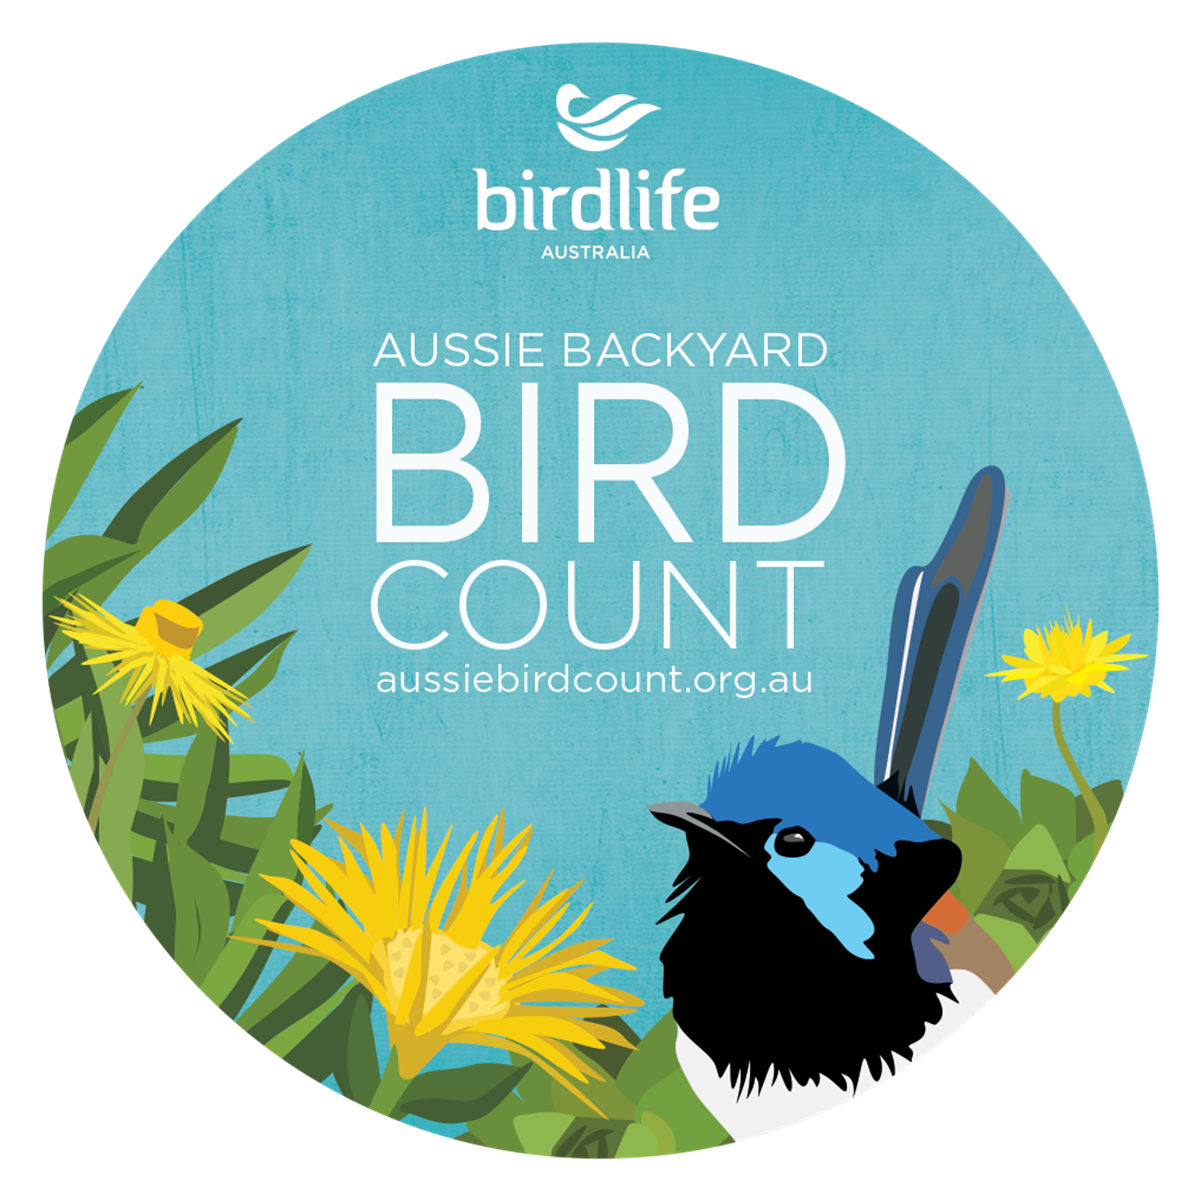 Aussie Backyard Bird Count » Wollondilly Shire Council